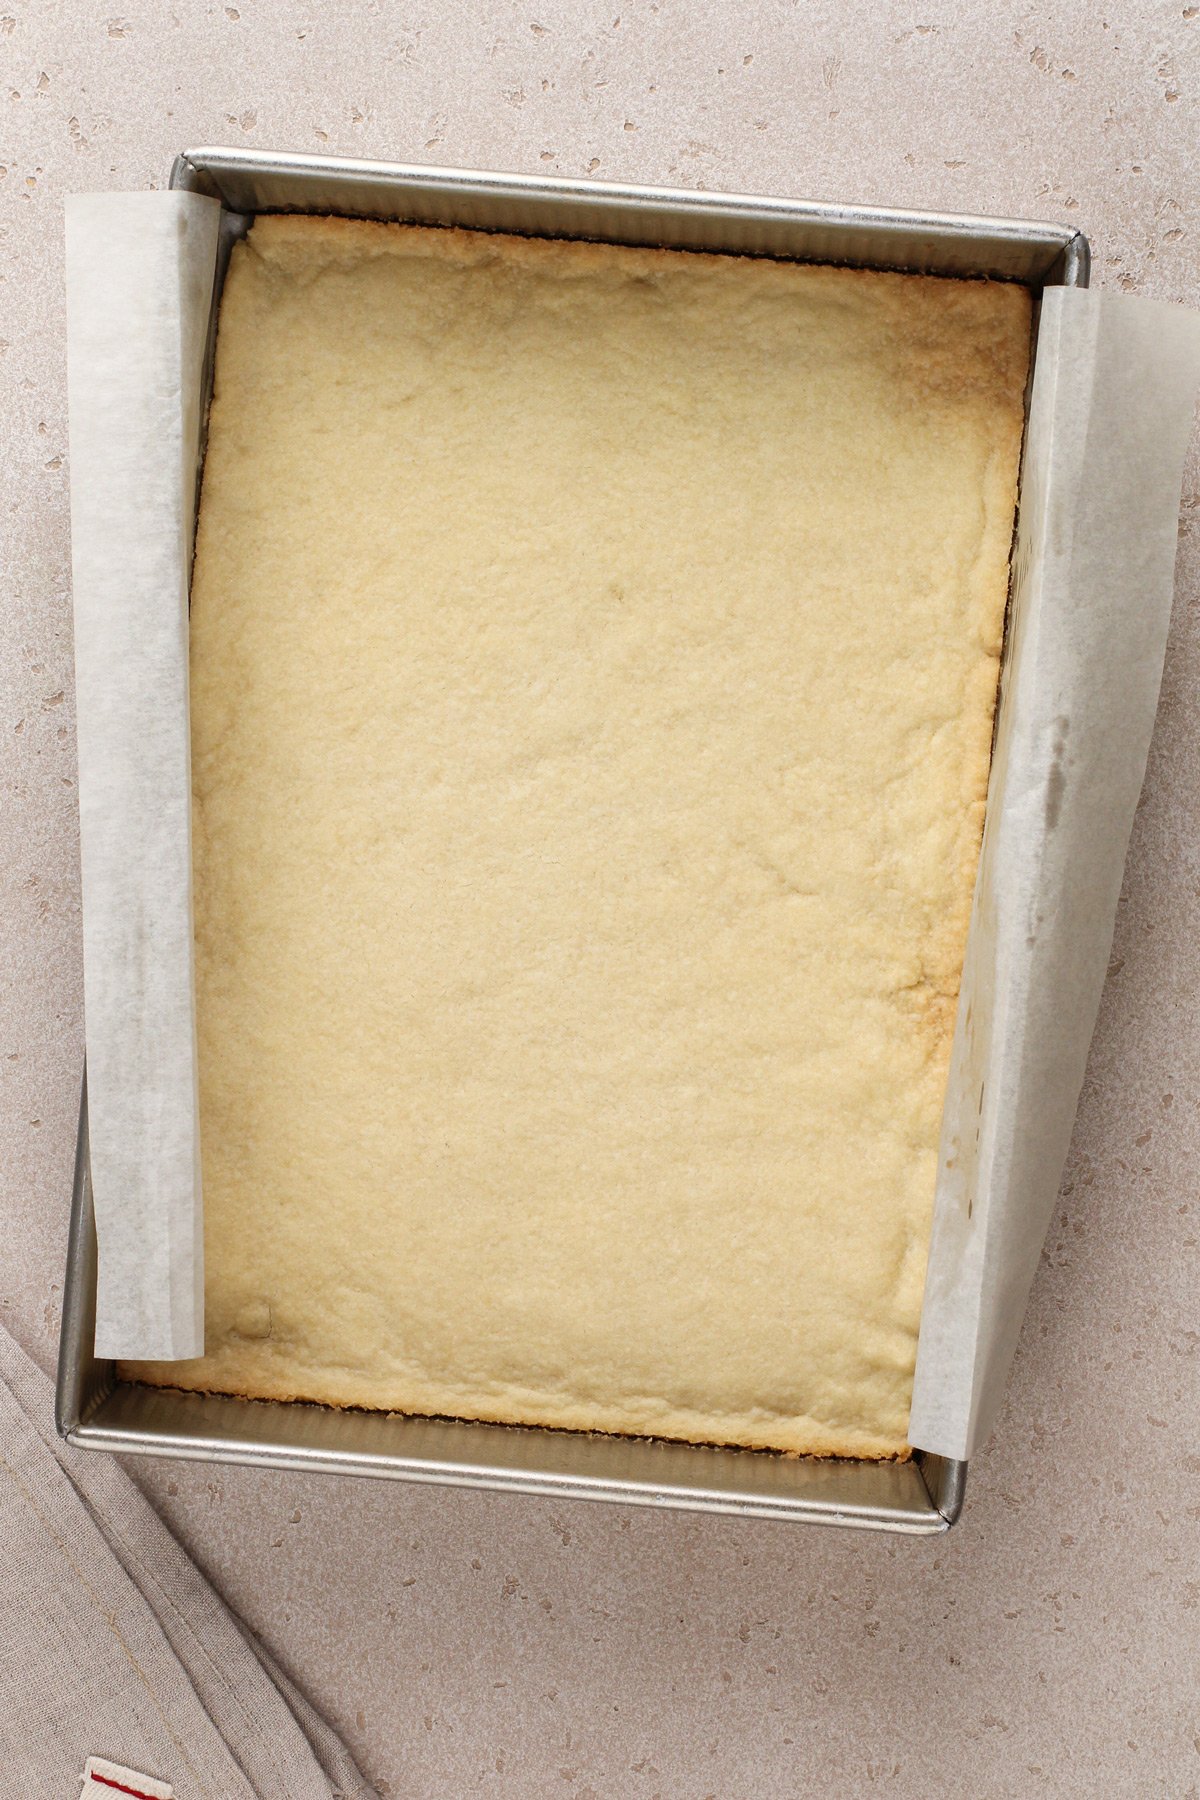 Baked crust for layered cherry cheesecake dessert in the bottom of a parchment-lined baking pan.